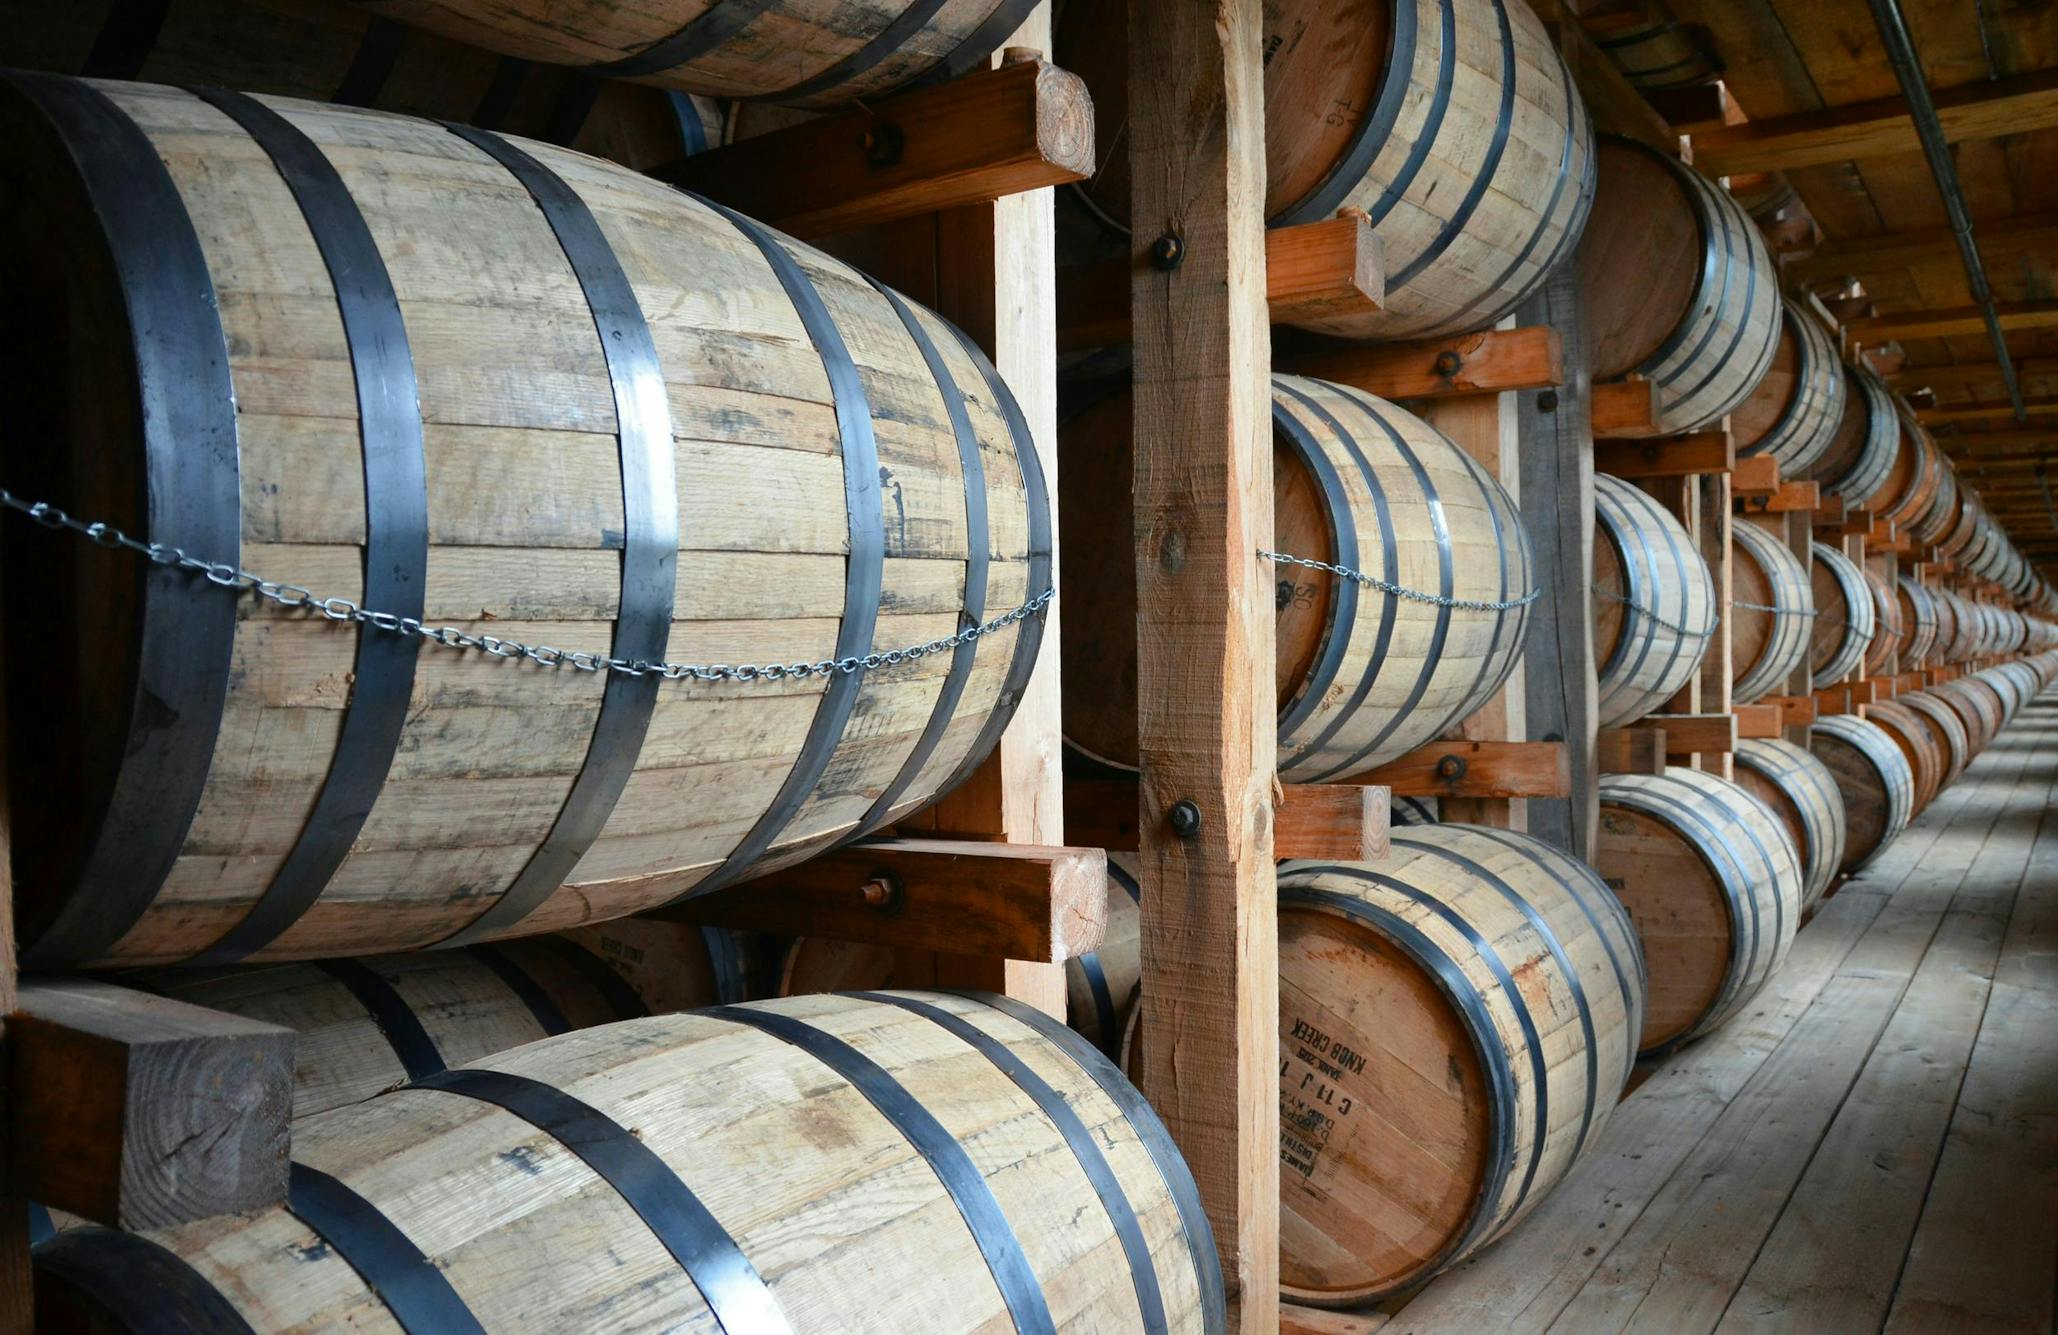 Does gin improve with barrel aging?